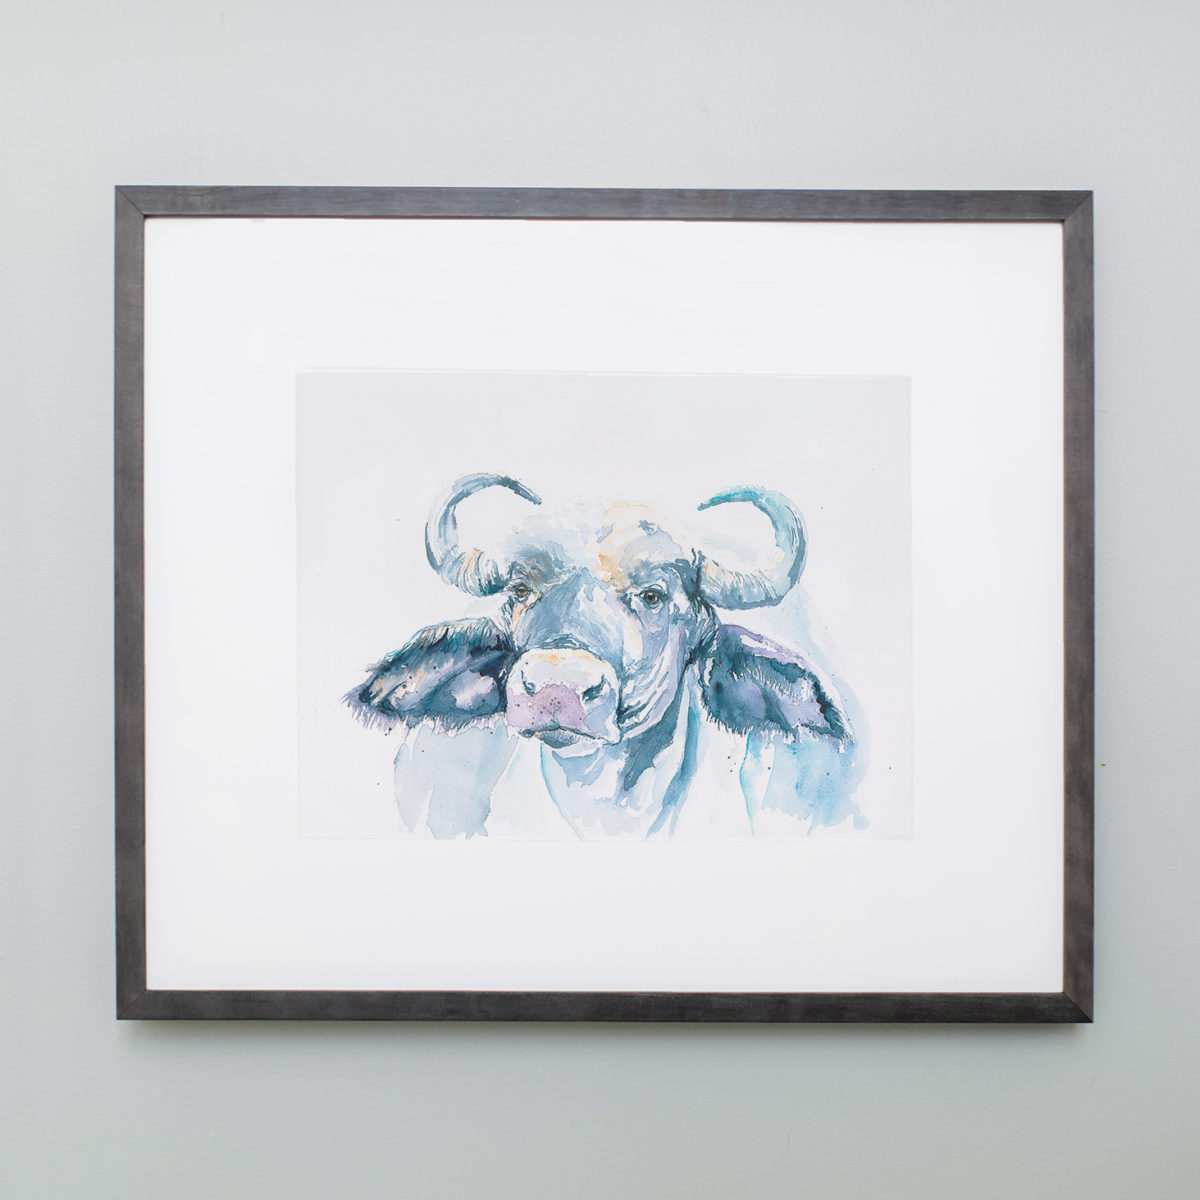 Watercolor of a blue African buffalo in a gray frame